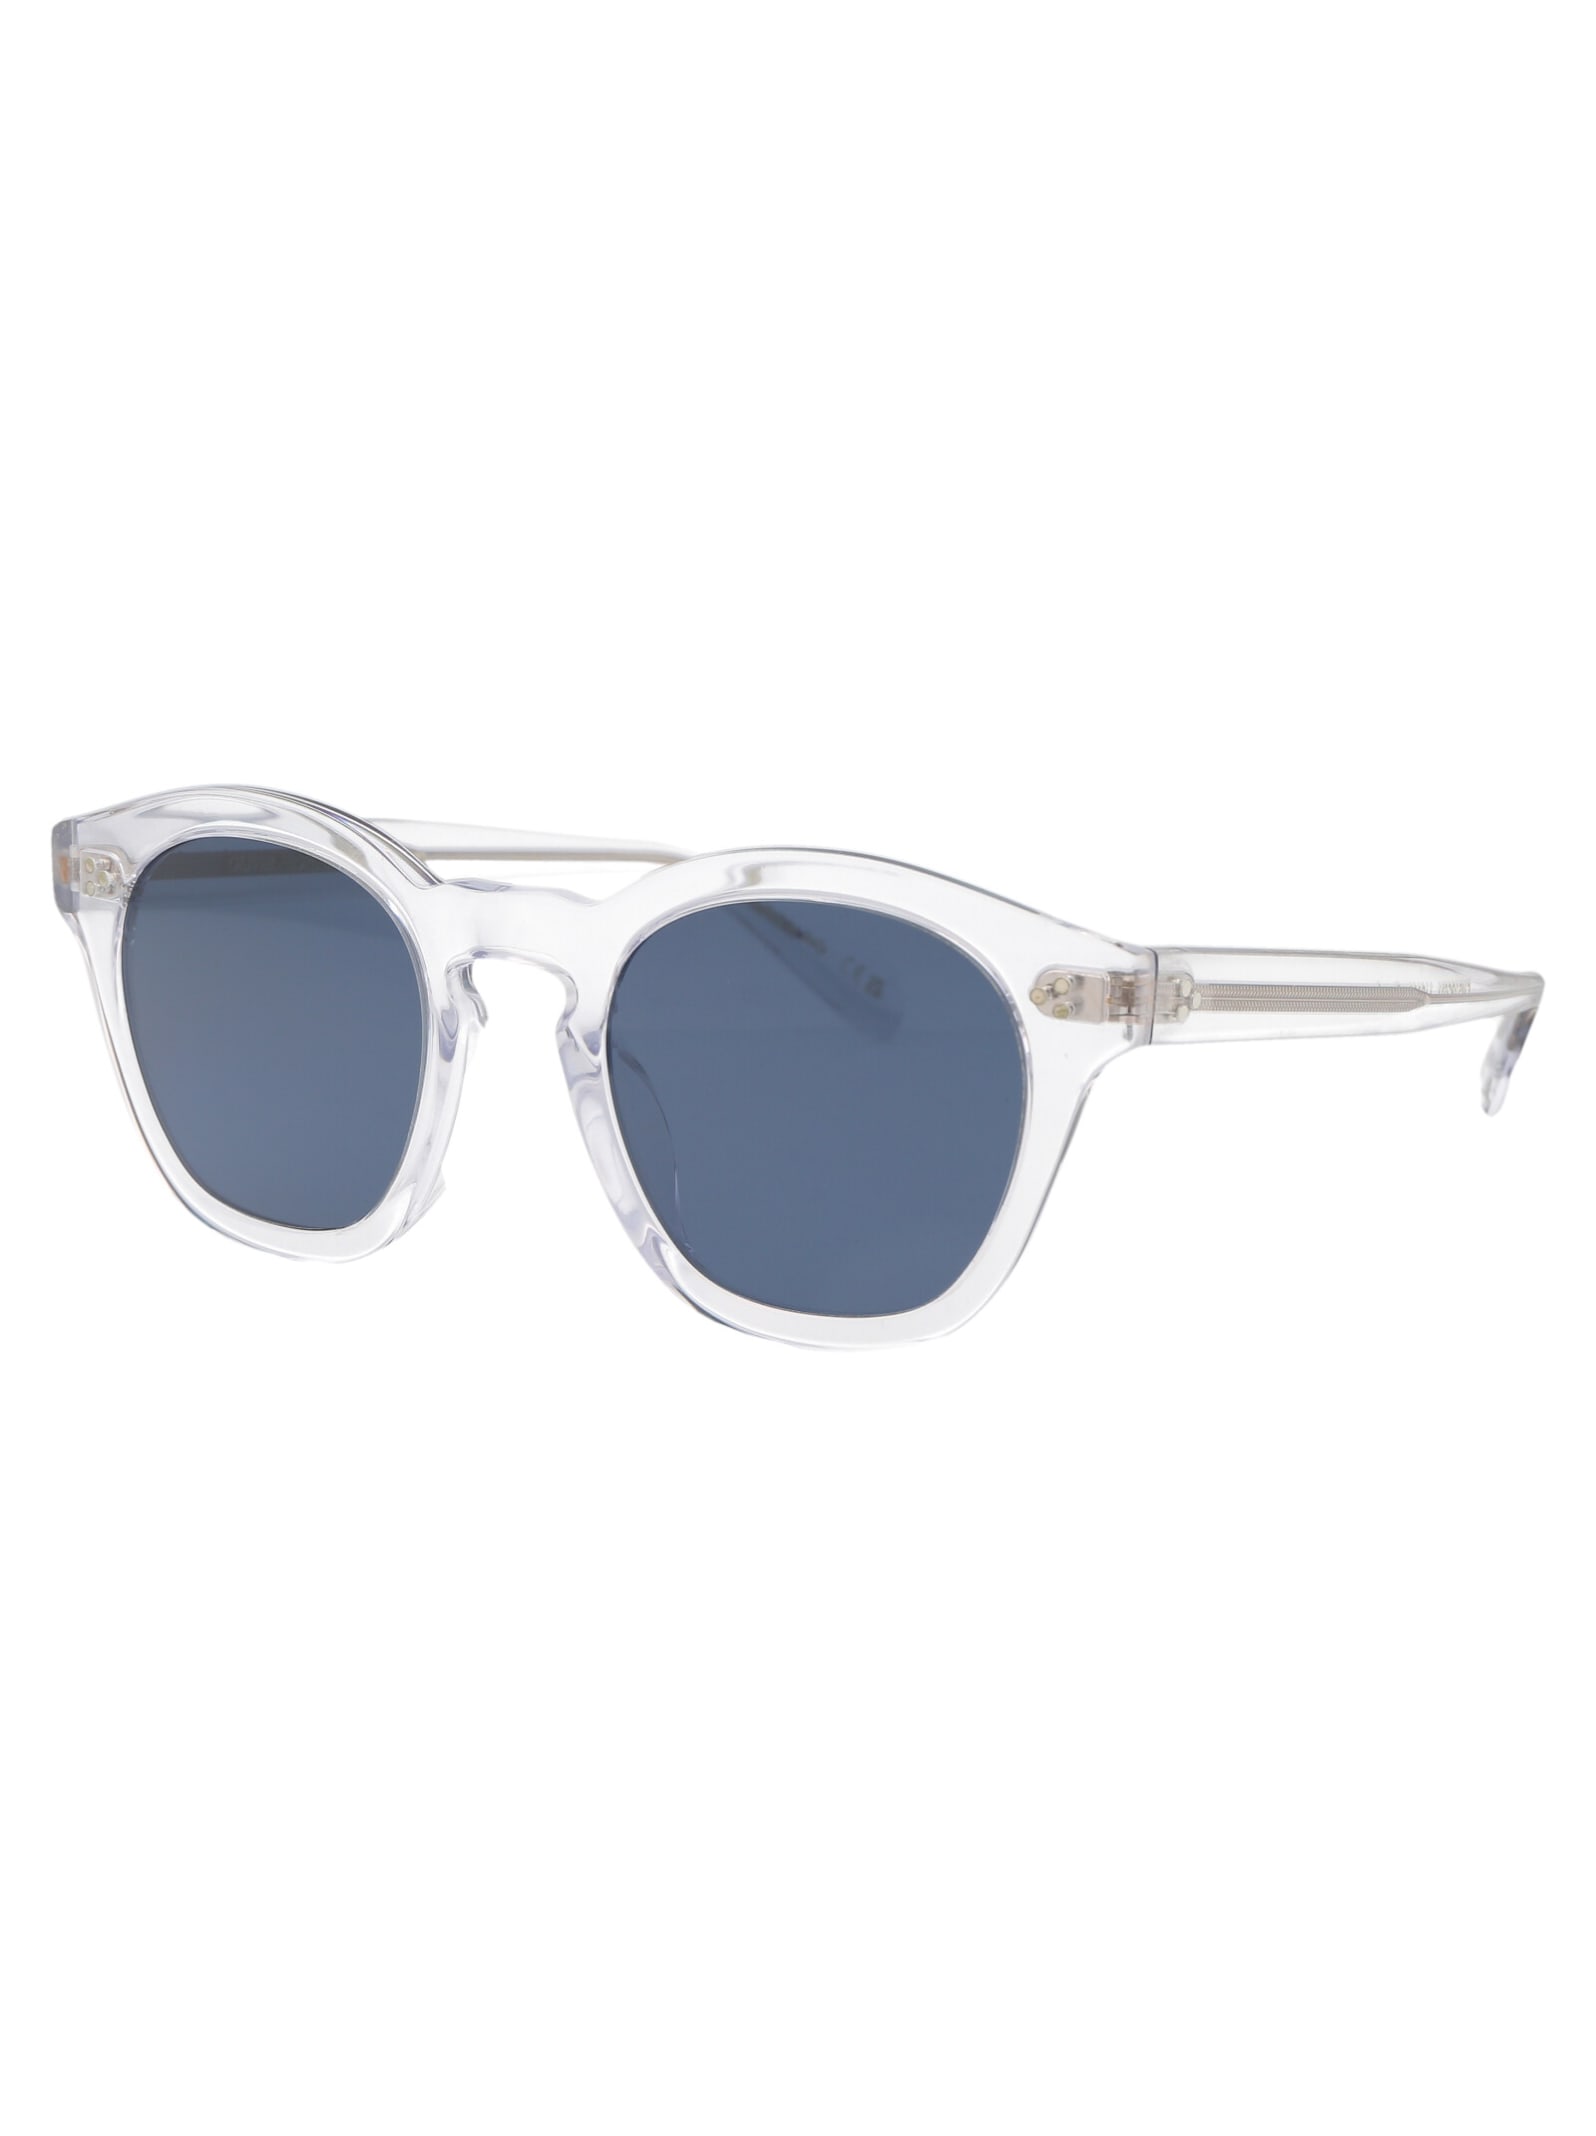 Shop Oliver Peoples Boudreau L.a Sunglasses In 110180 Crystal